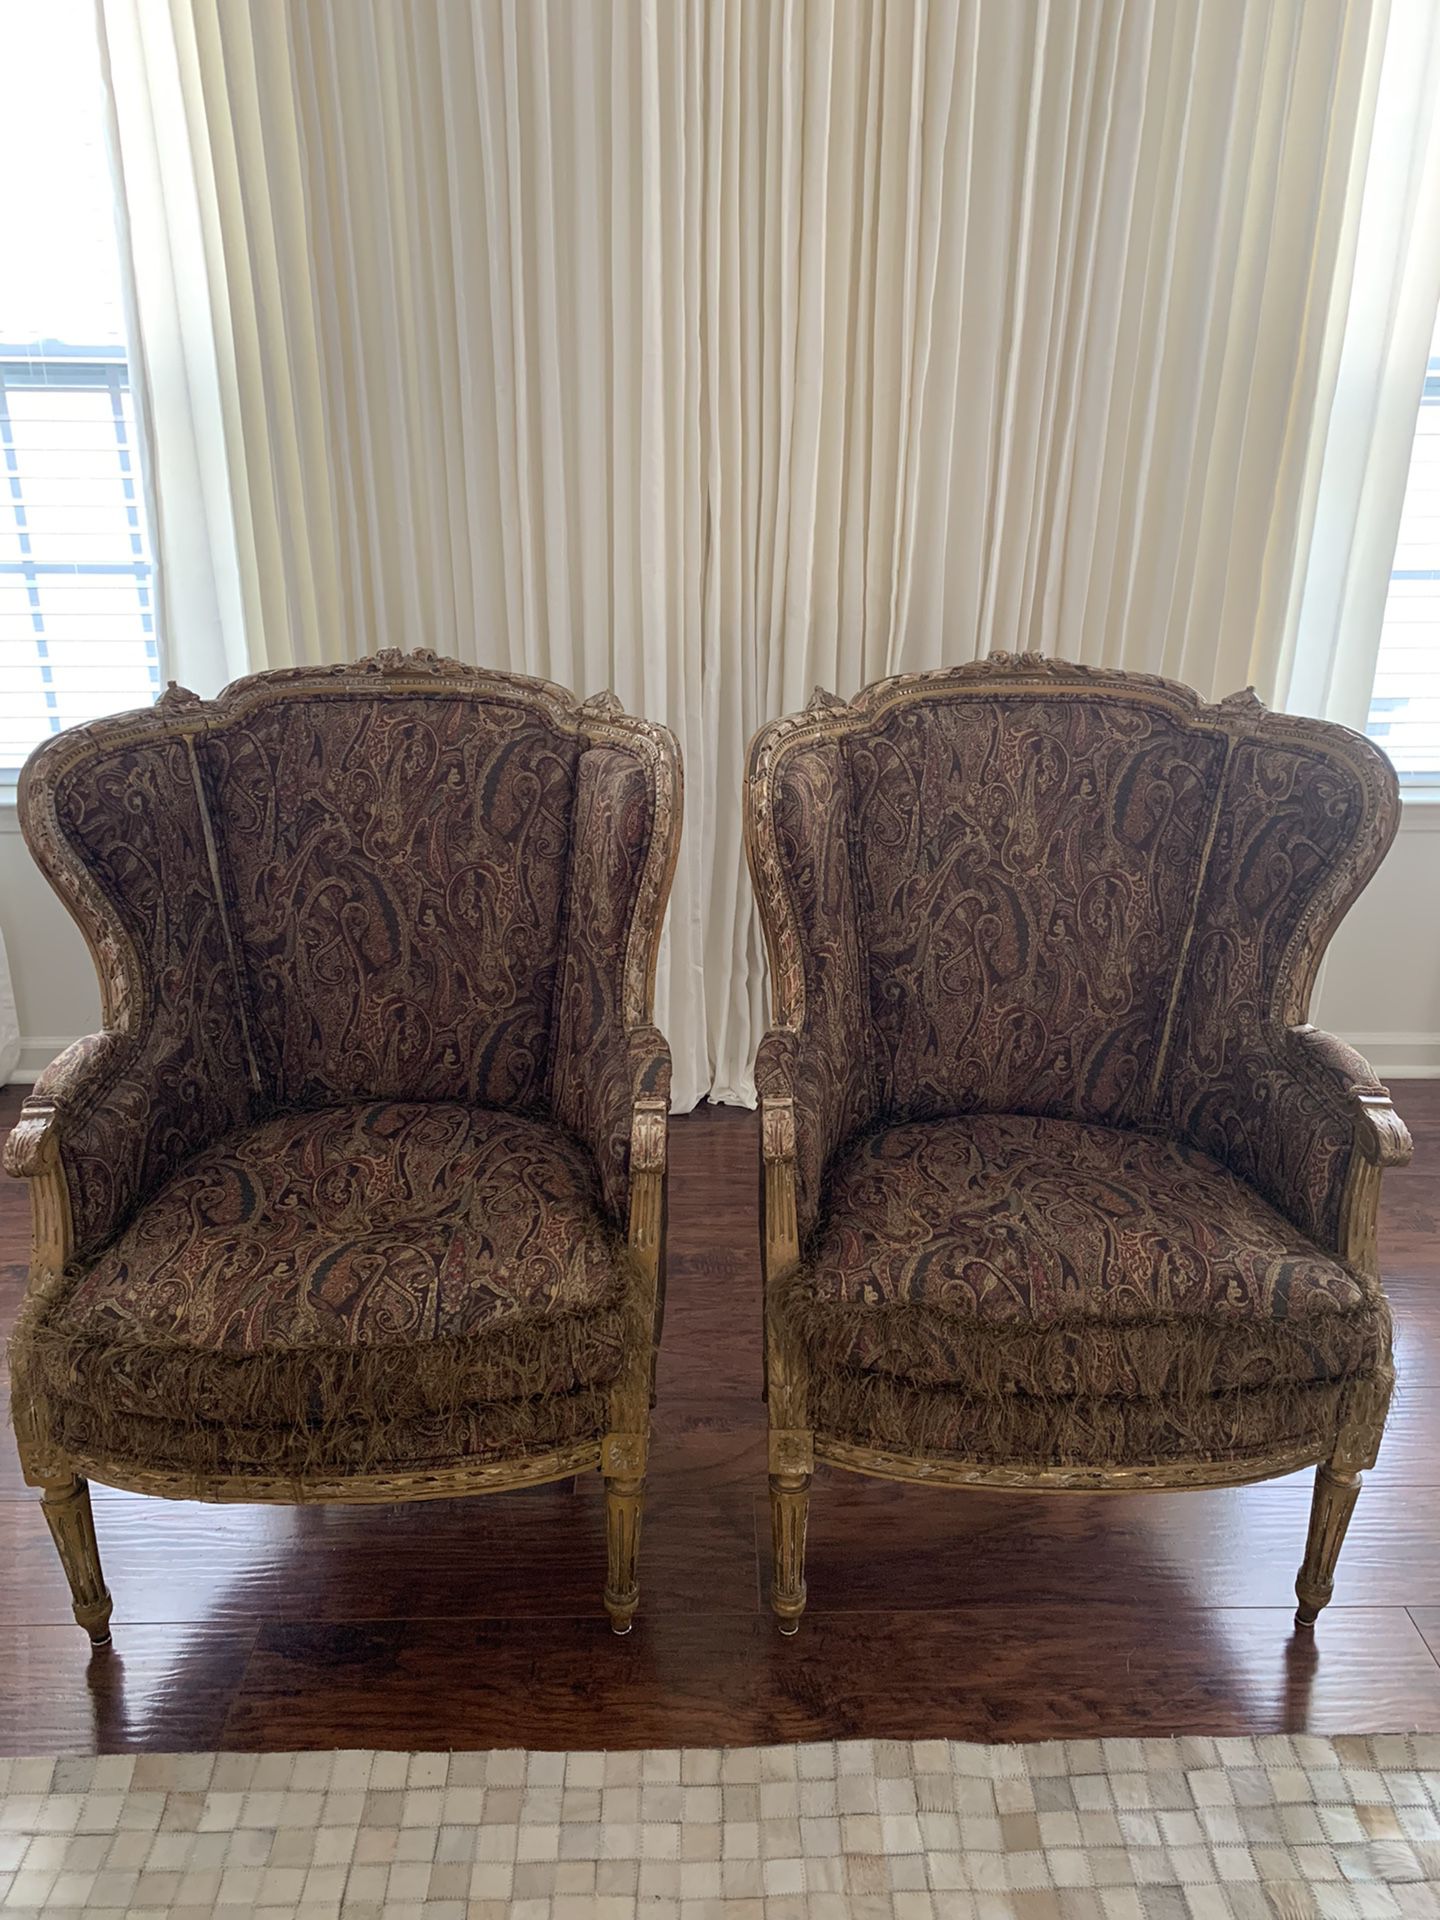 Antique Pair Of French Bergere Chairs